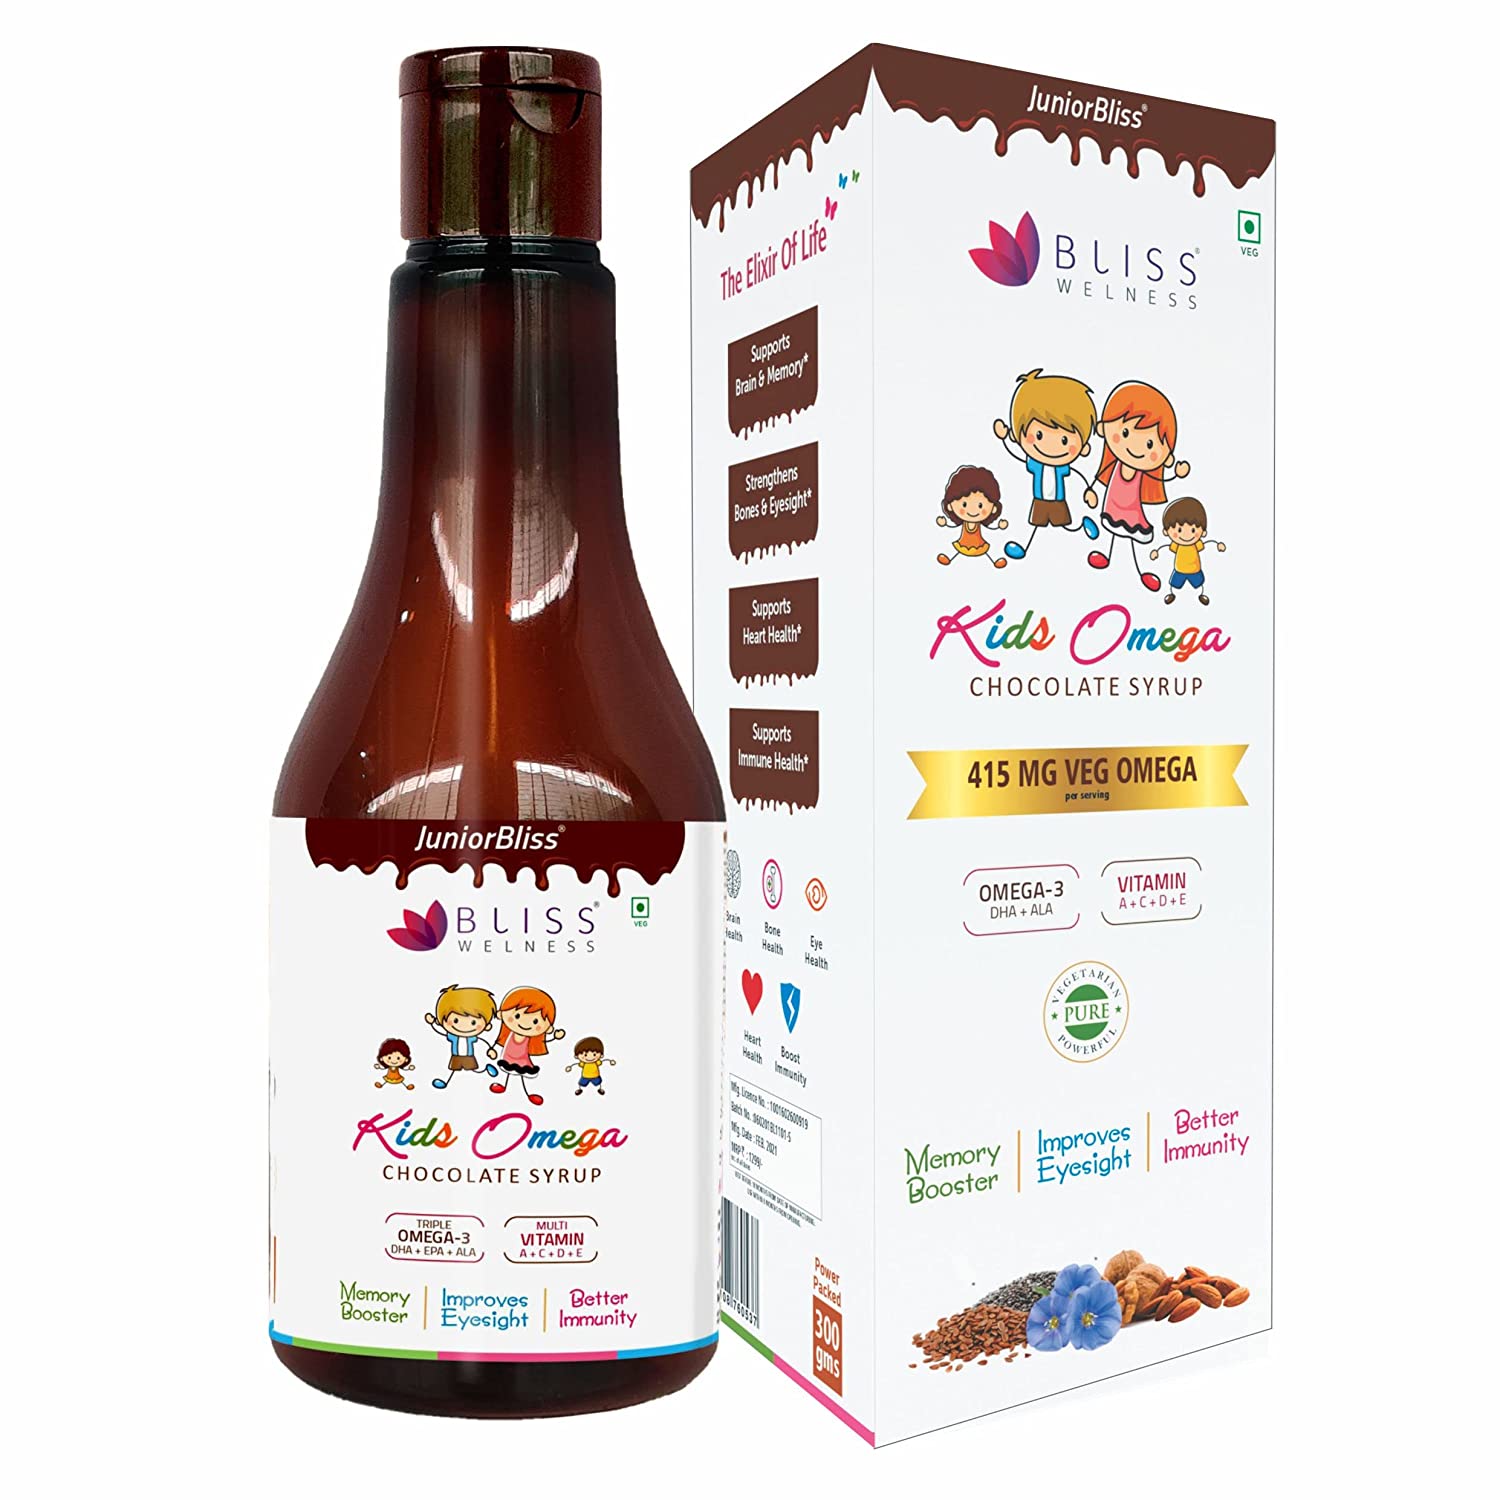 Bliss Welness Junior Bliss Kids Omega 3 6 9 with Omega 3 300MG (DHA 100mg EPA 30mg ALA 170mg) Vitamin A C D E Multivitamin Supplement- Chocolate Flavor Syrup